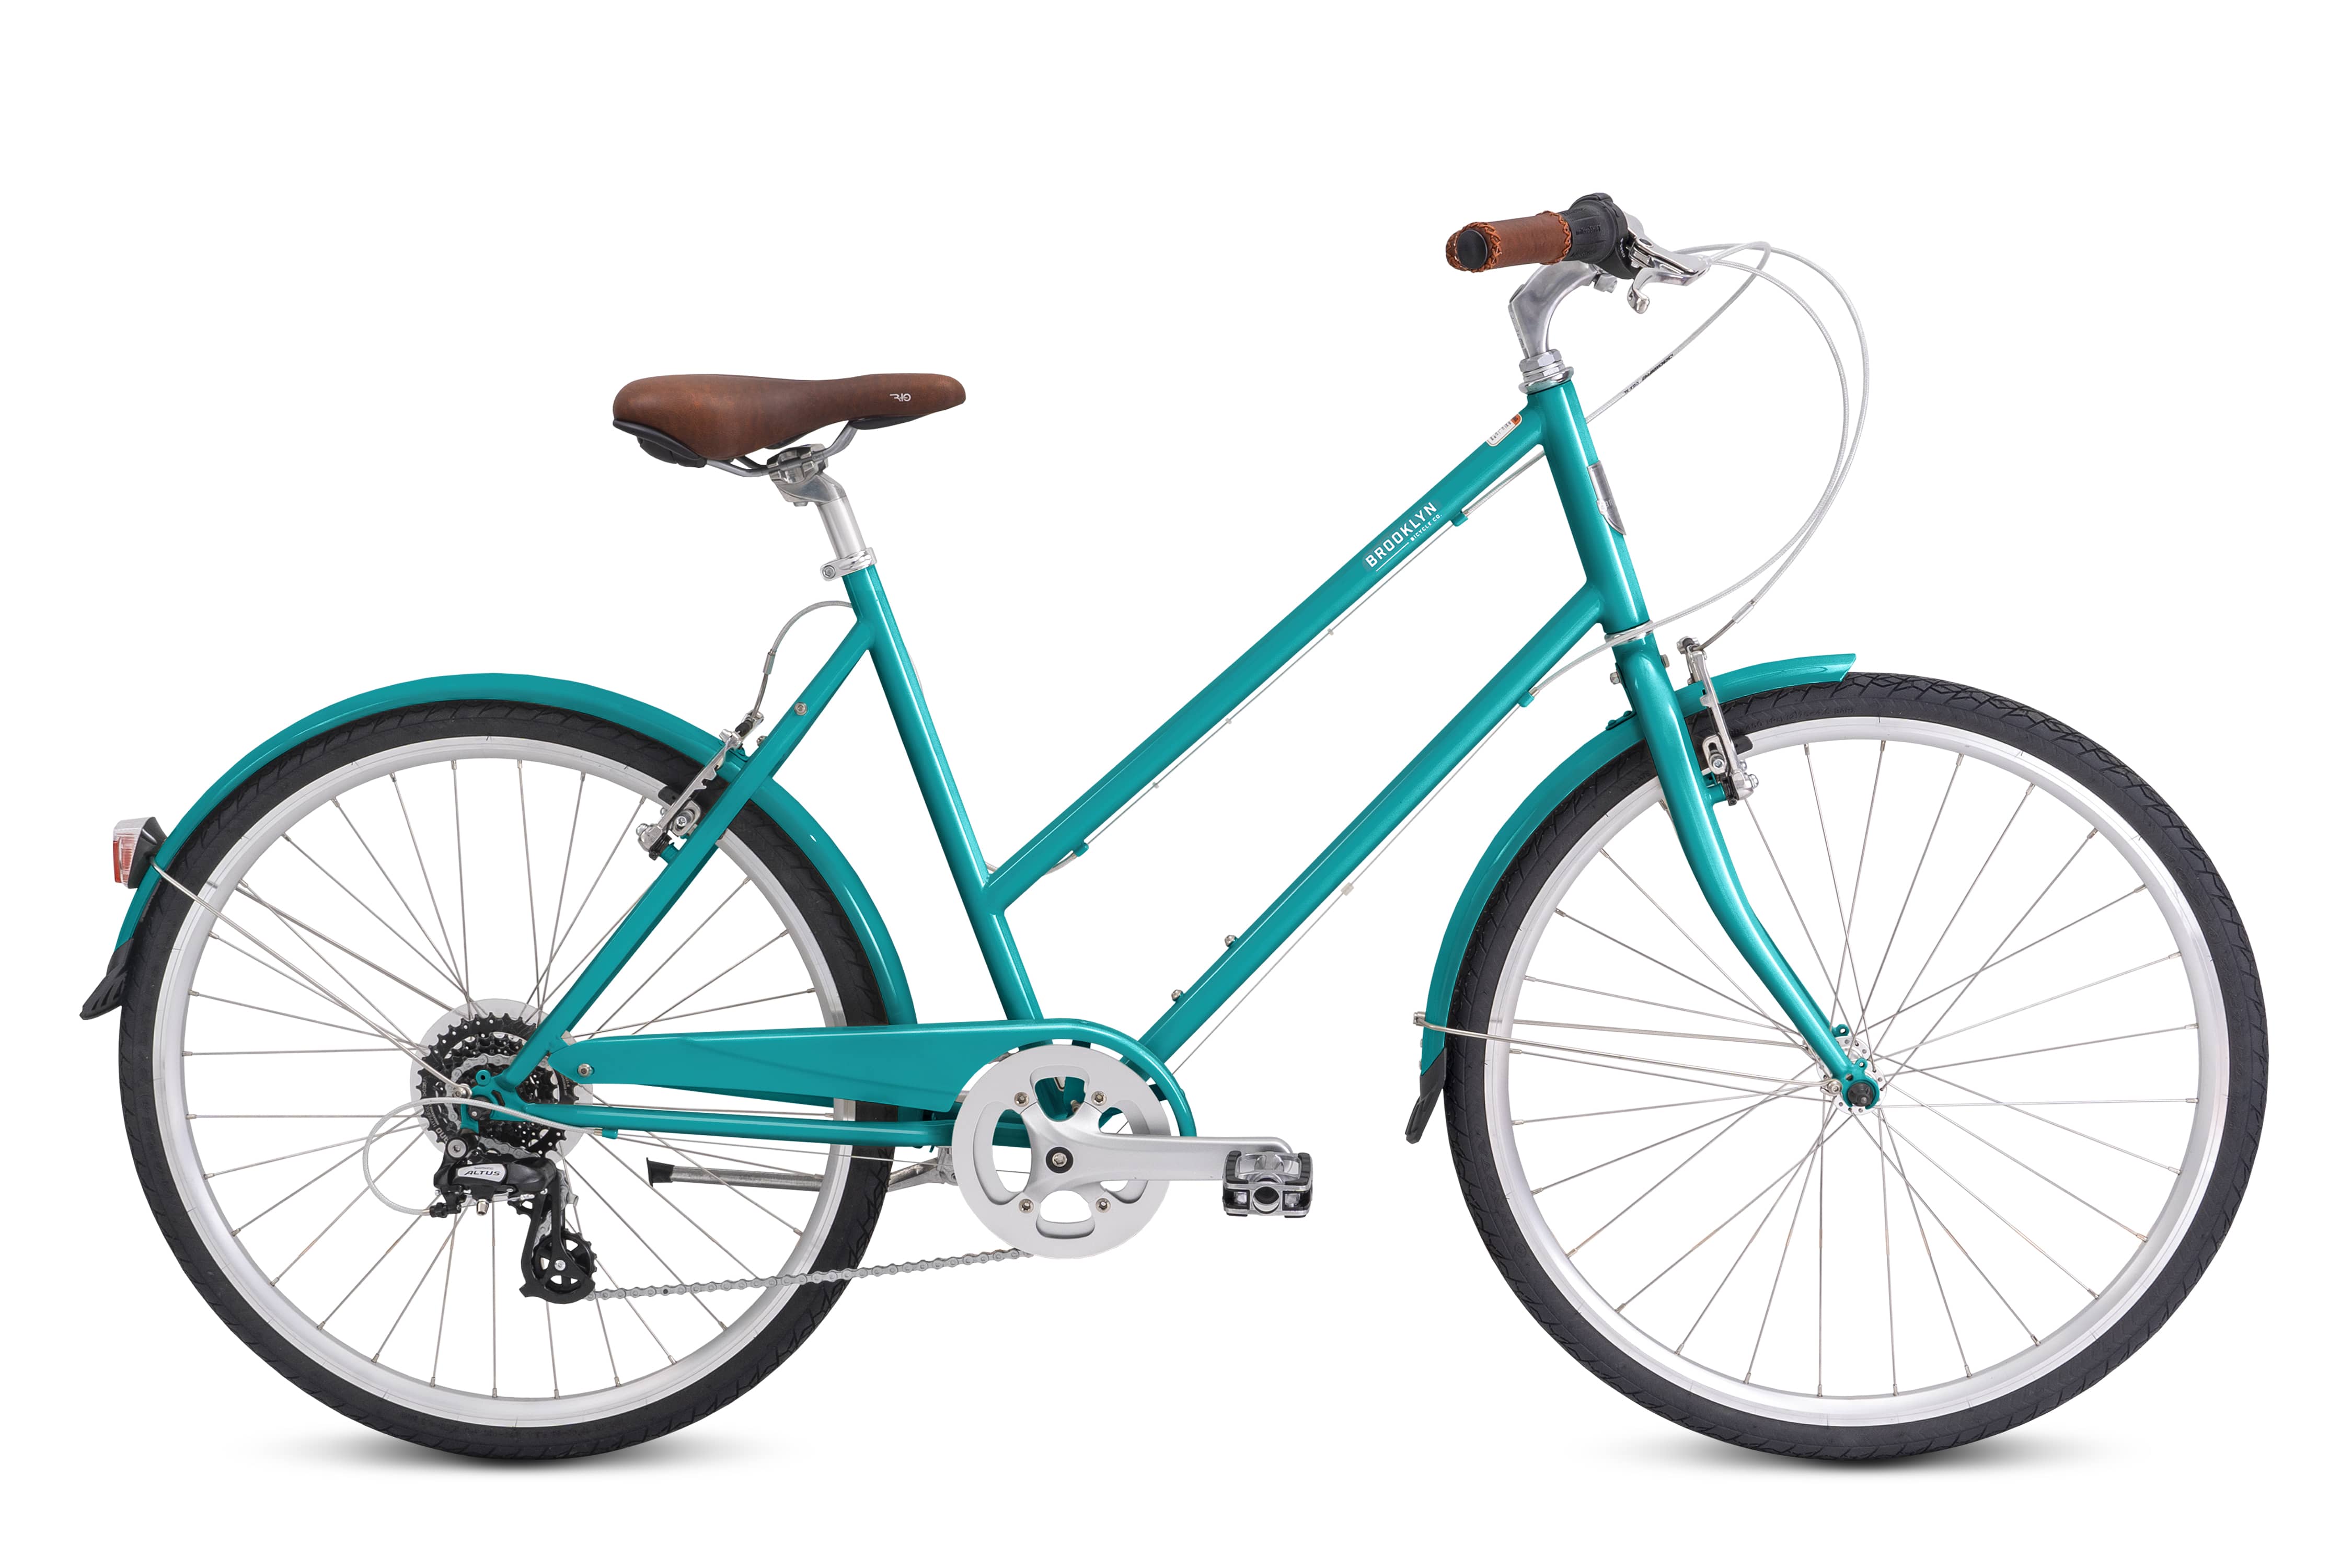 Franklin 8 Speed 8 Speed Step Through Bicycle | Franklin Eight City Cruiser  Sea Glass / S/M 8D-FRA-SG-M